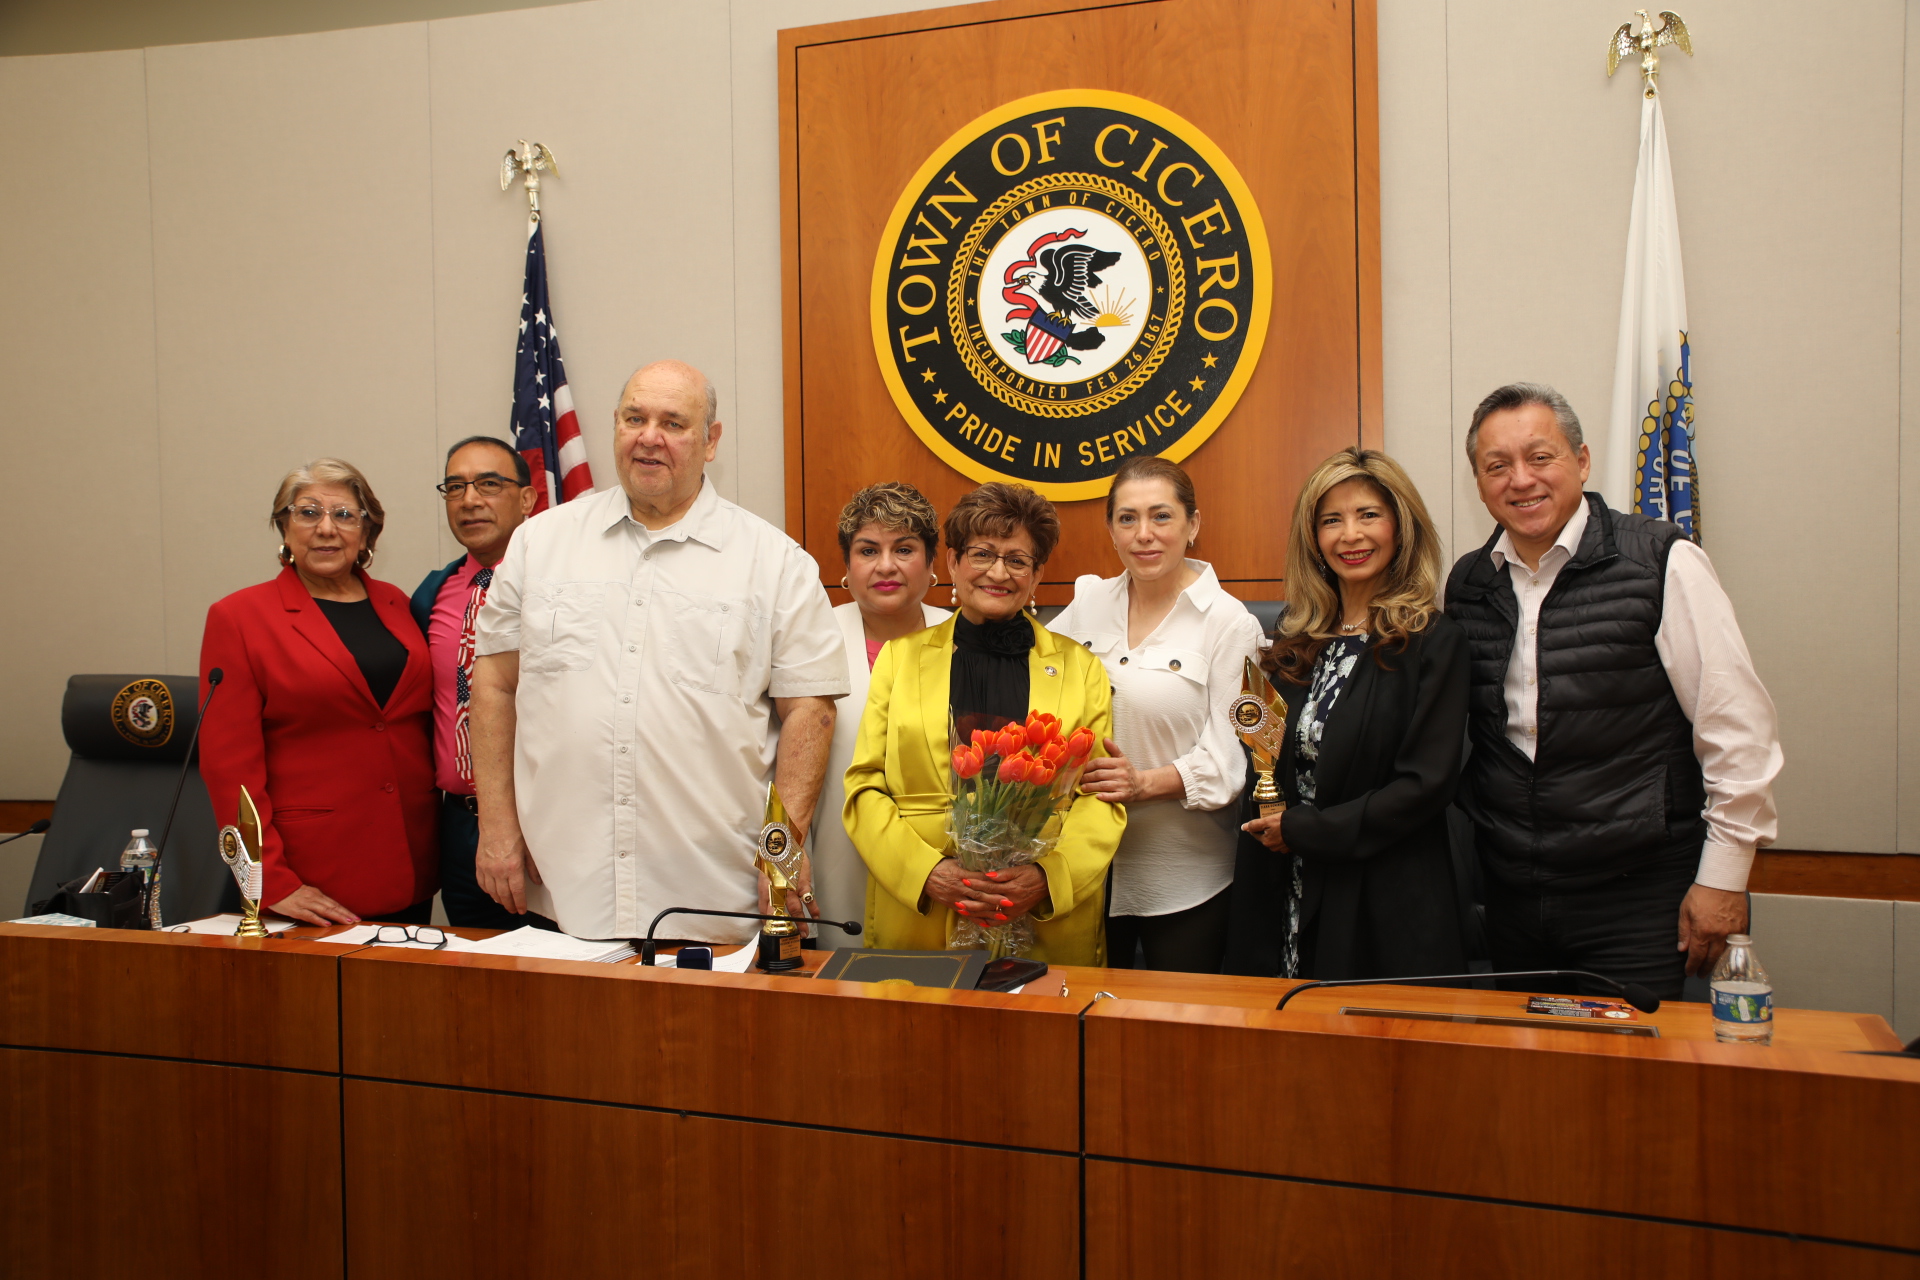 Trustee Blanca Vargas with President Dominick and officials and friends after being sworn in to office as a trustee at the may 9, 2023 board meeting